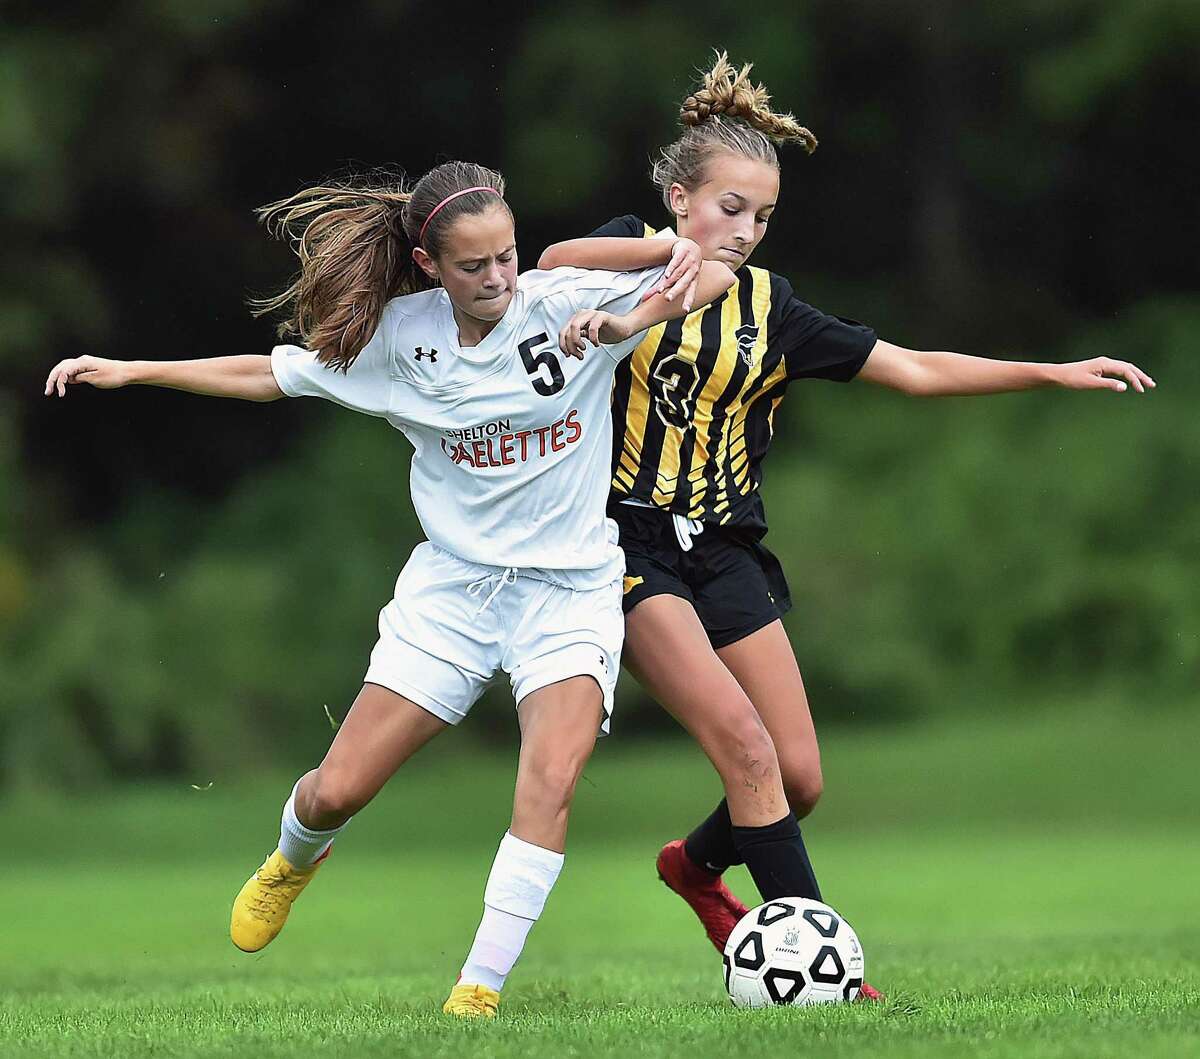 Shelton’s Elizabeth Porto wins control of the ball as Amity’s Martyna Krzysztopik defends on Tuesday. Shelton won, 3-0, and remain undefeated at 7-0.